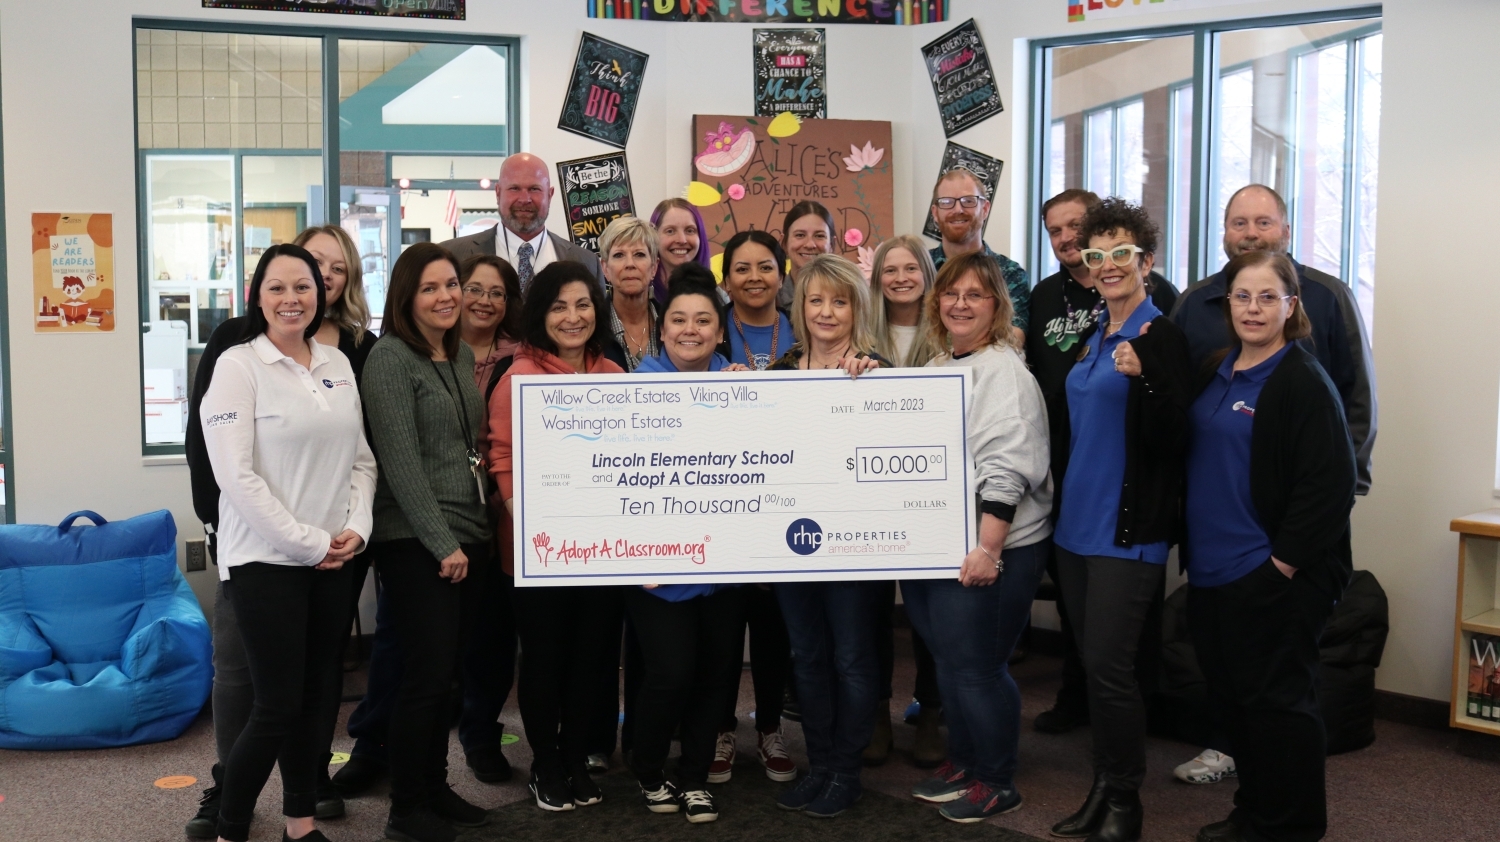 RHP Properties reaches 10th school adoptions and $100,000 in donations for Nationwide educational initiatives through AdoptAClassroom.org partnership